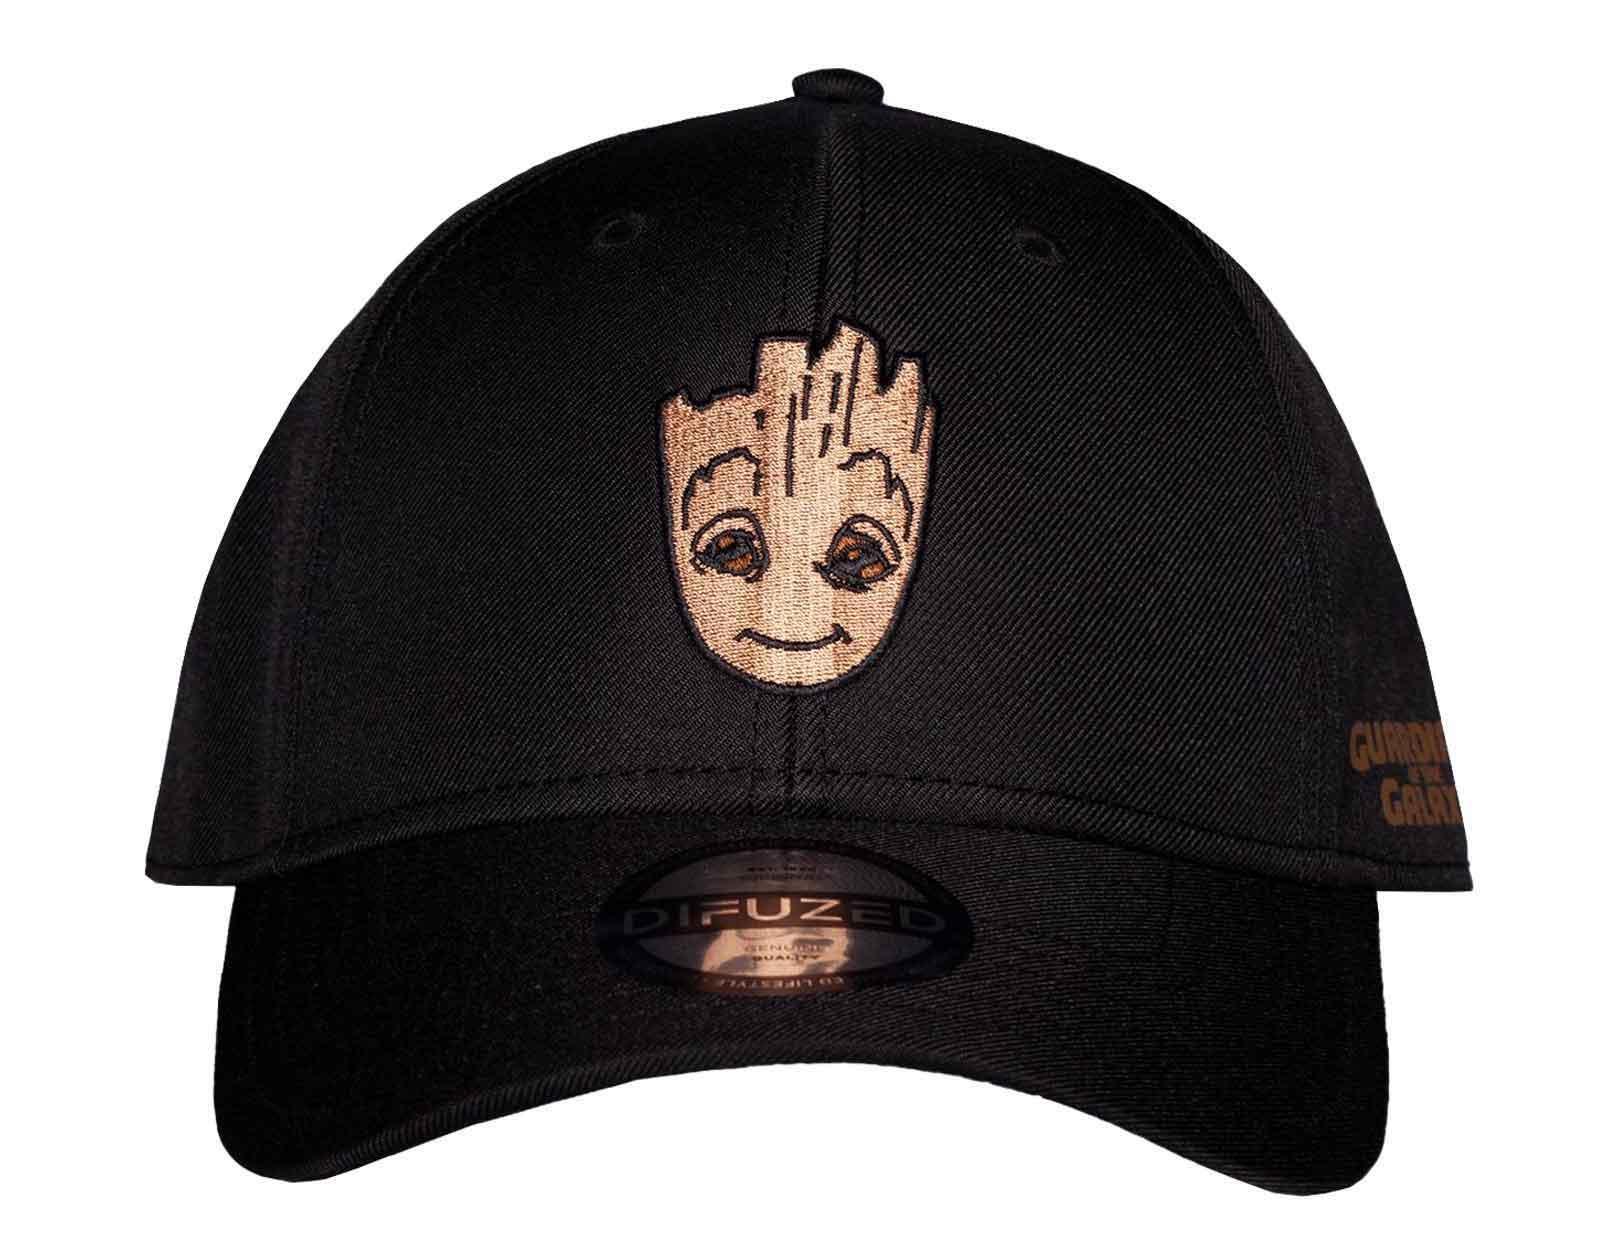 Groot Baseball Cap embroidery Logo new Official Marvel Black Snapback One Size